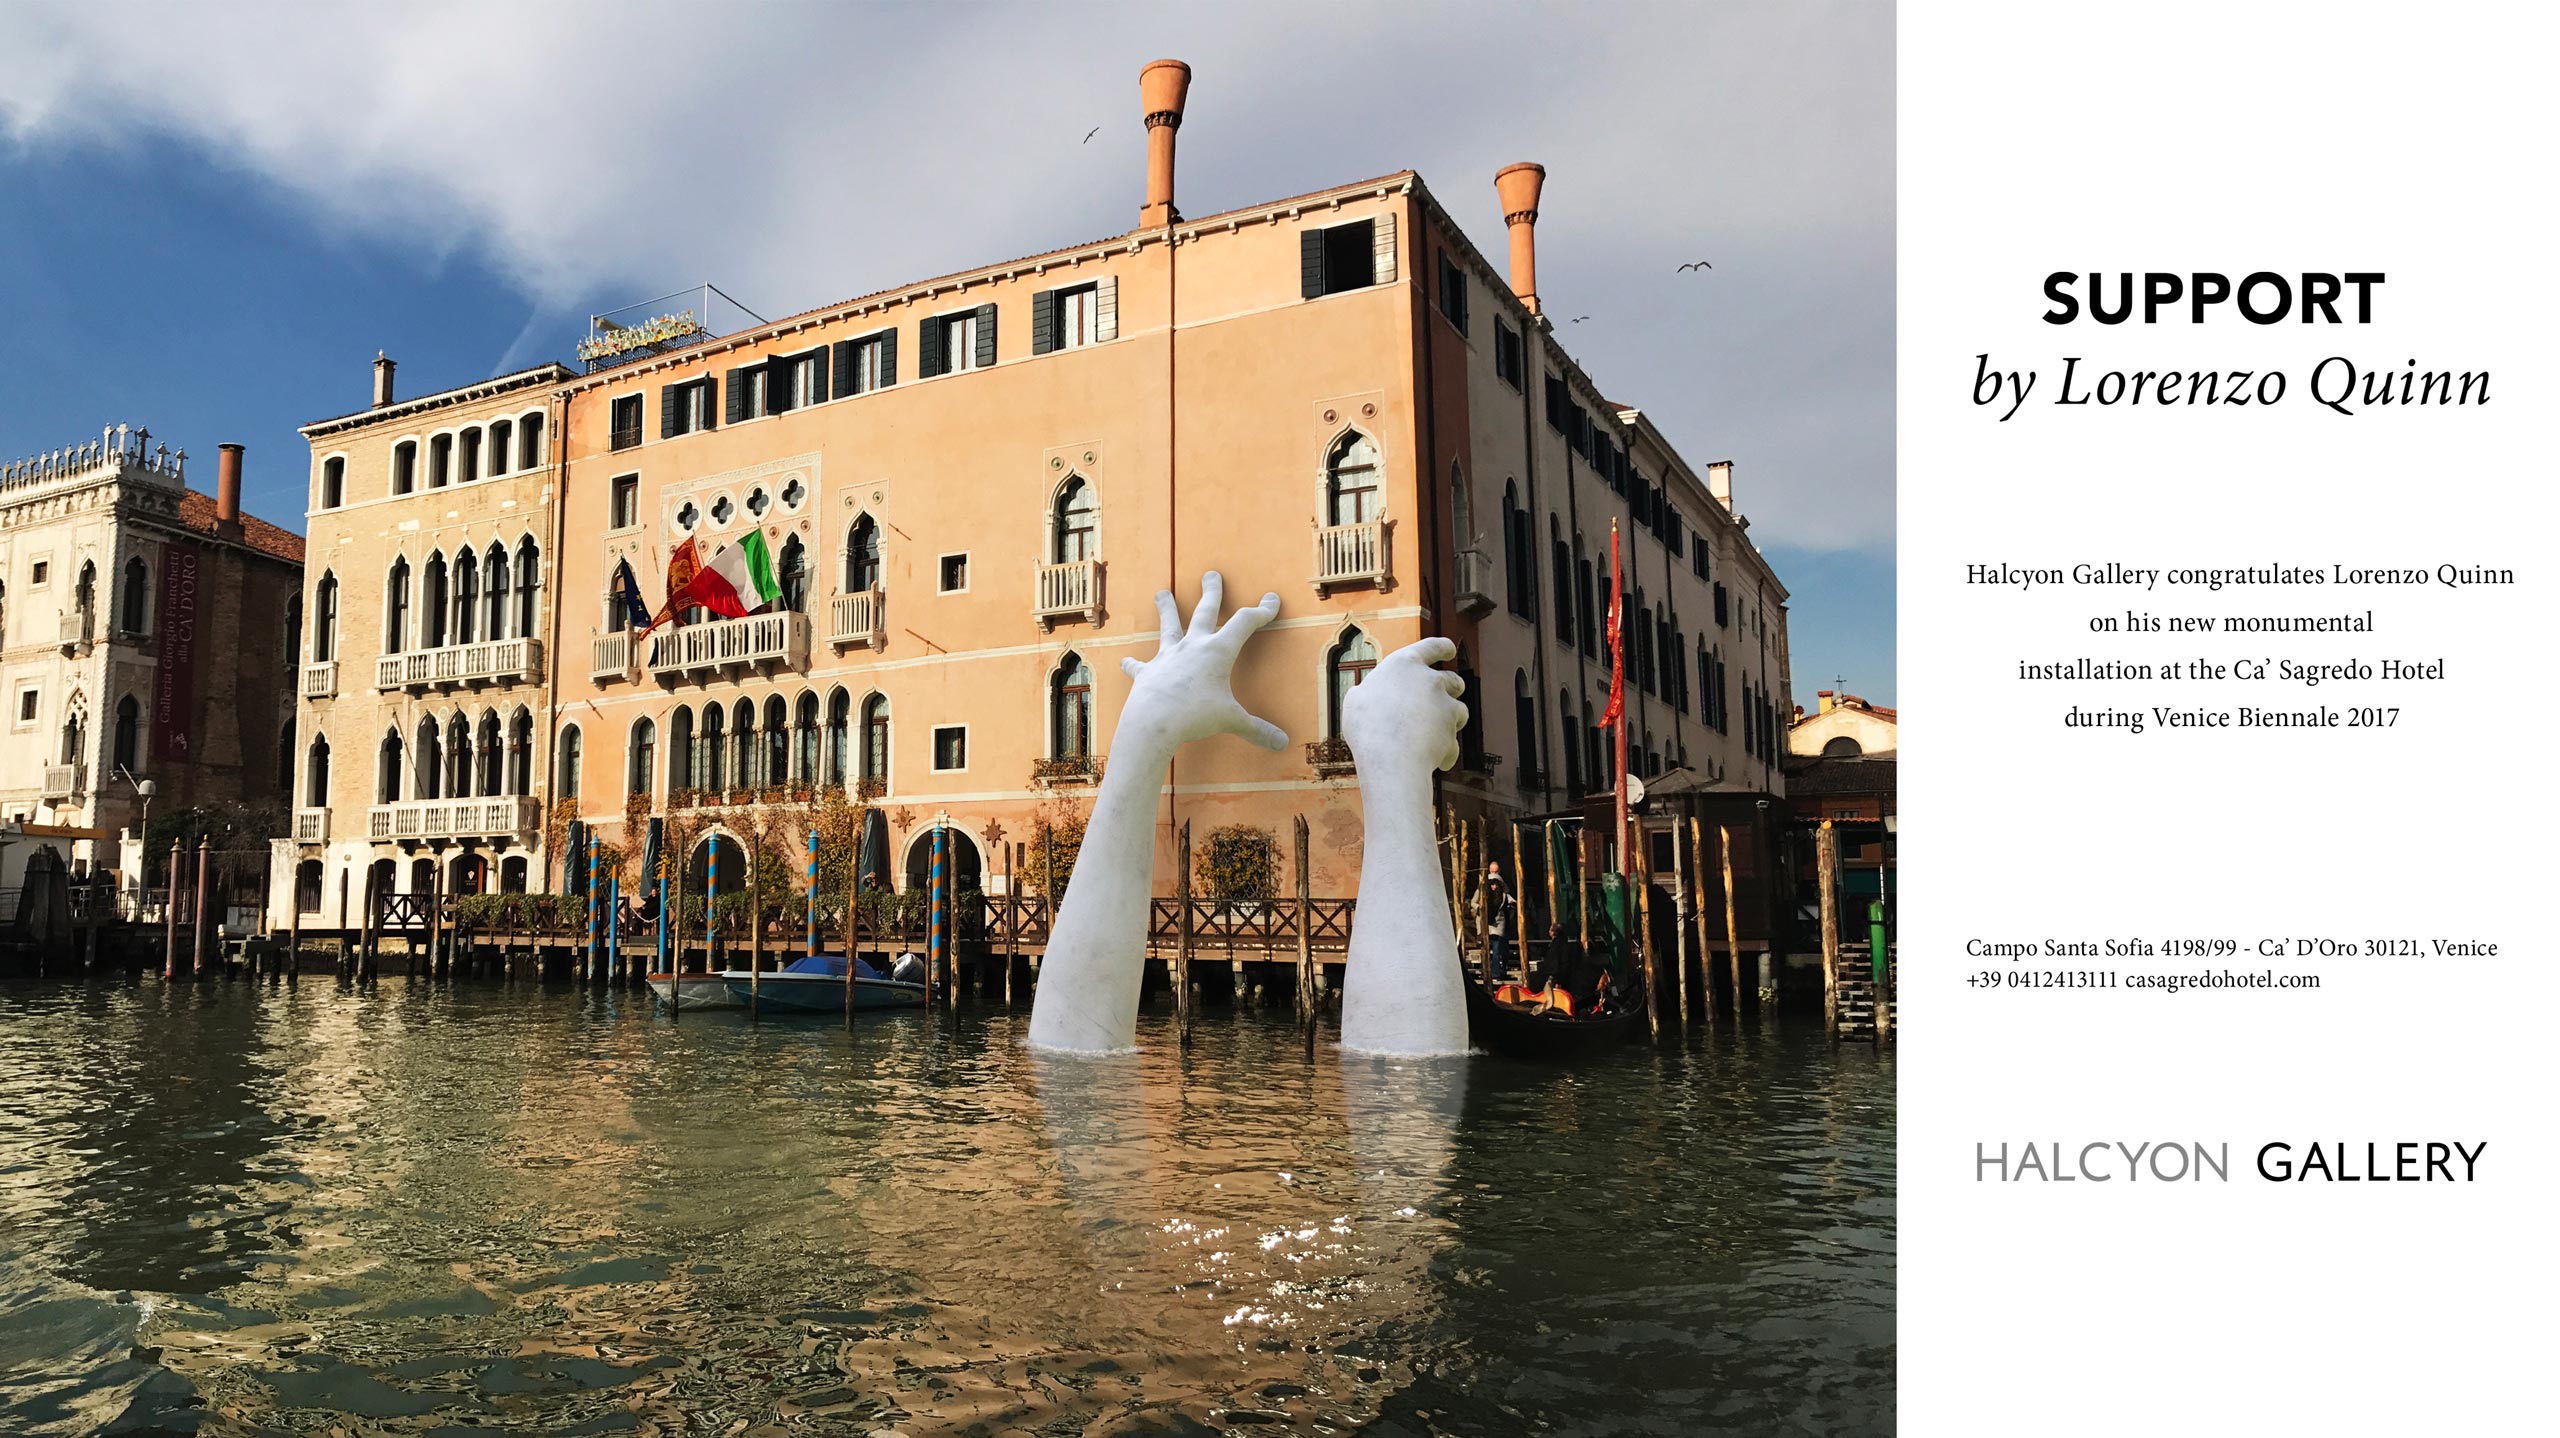 At the Venice Biennale, giant hands to raise climate change awareness